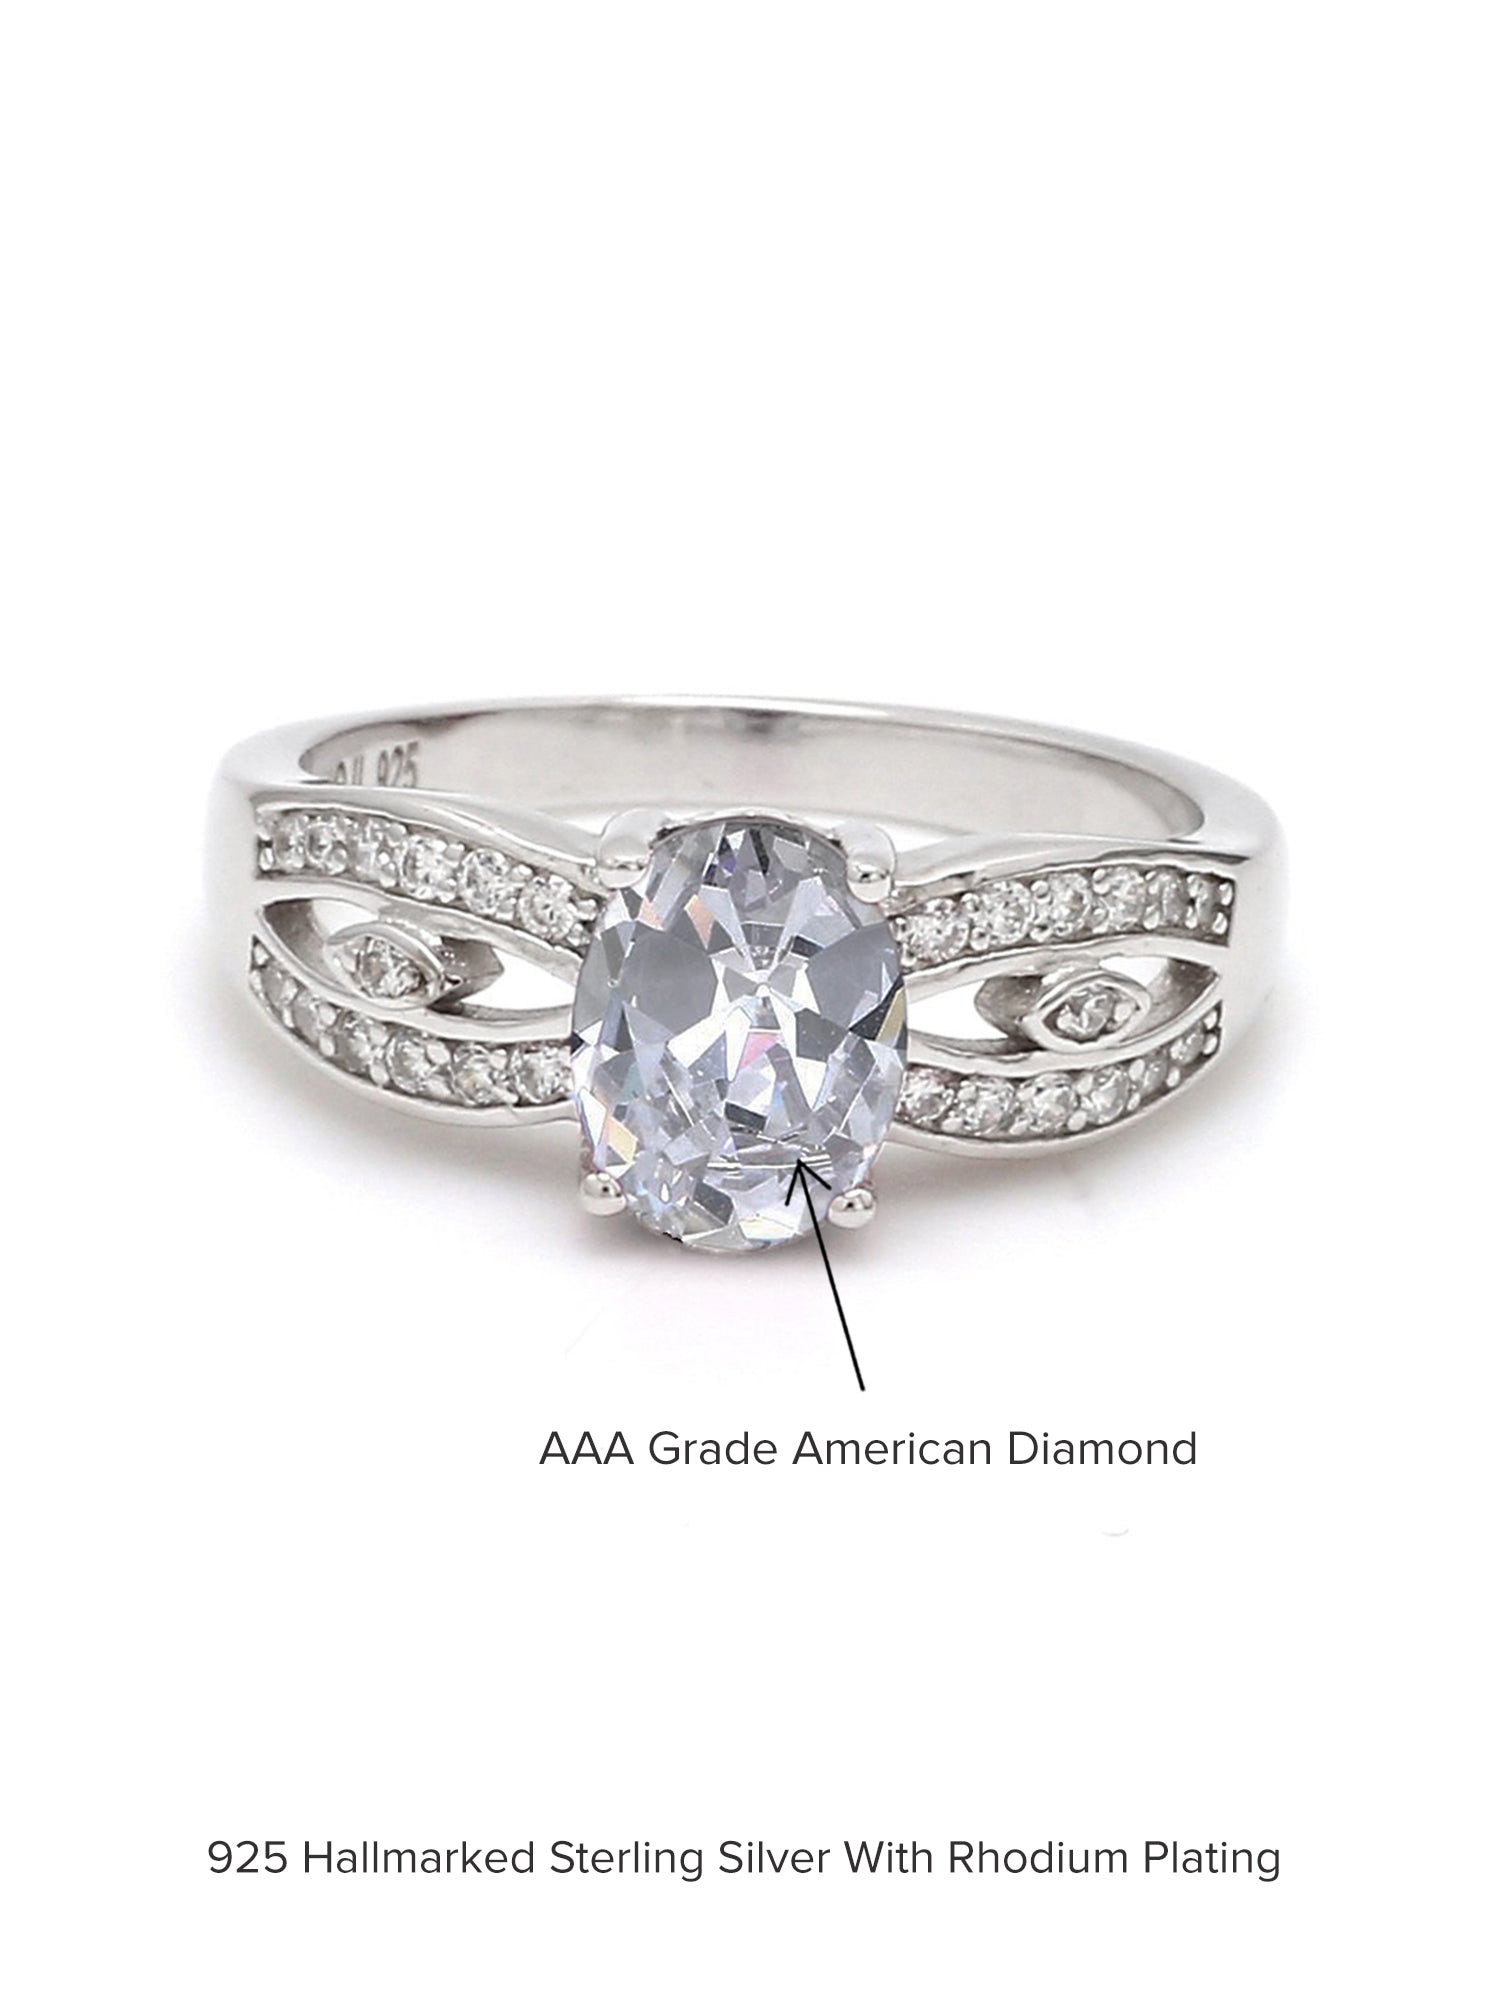 ORNATE JEWELS AMERICAN DIAMOND OVAL SOLITAIRE RING IN SILVER-5